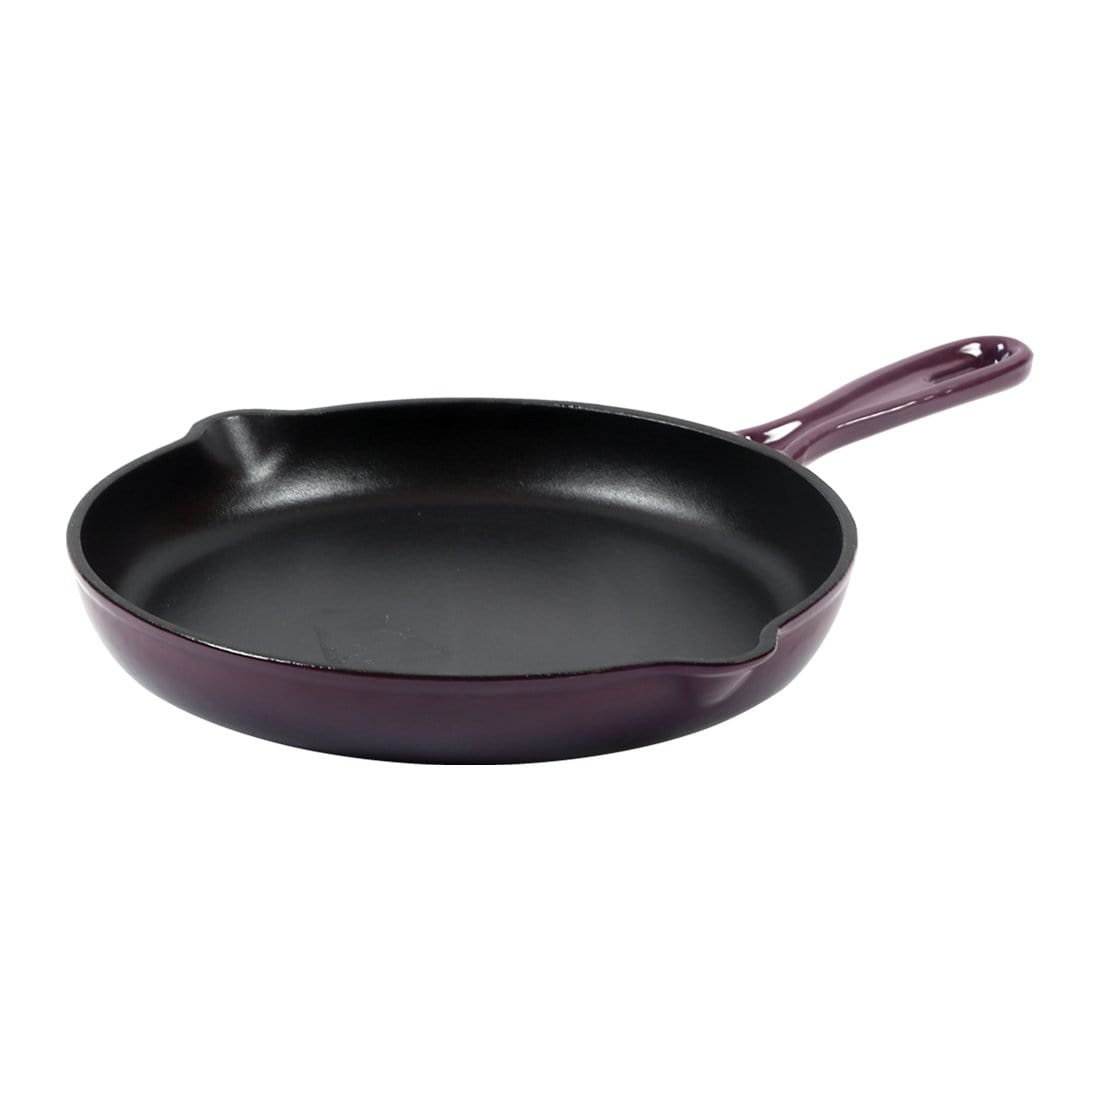 This Cast Iron Flat Top Is Super Versatile — And Beautiful, Too